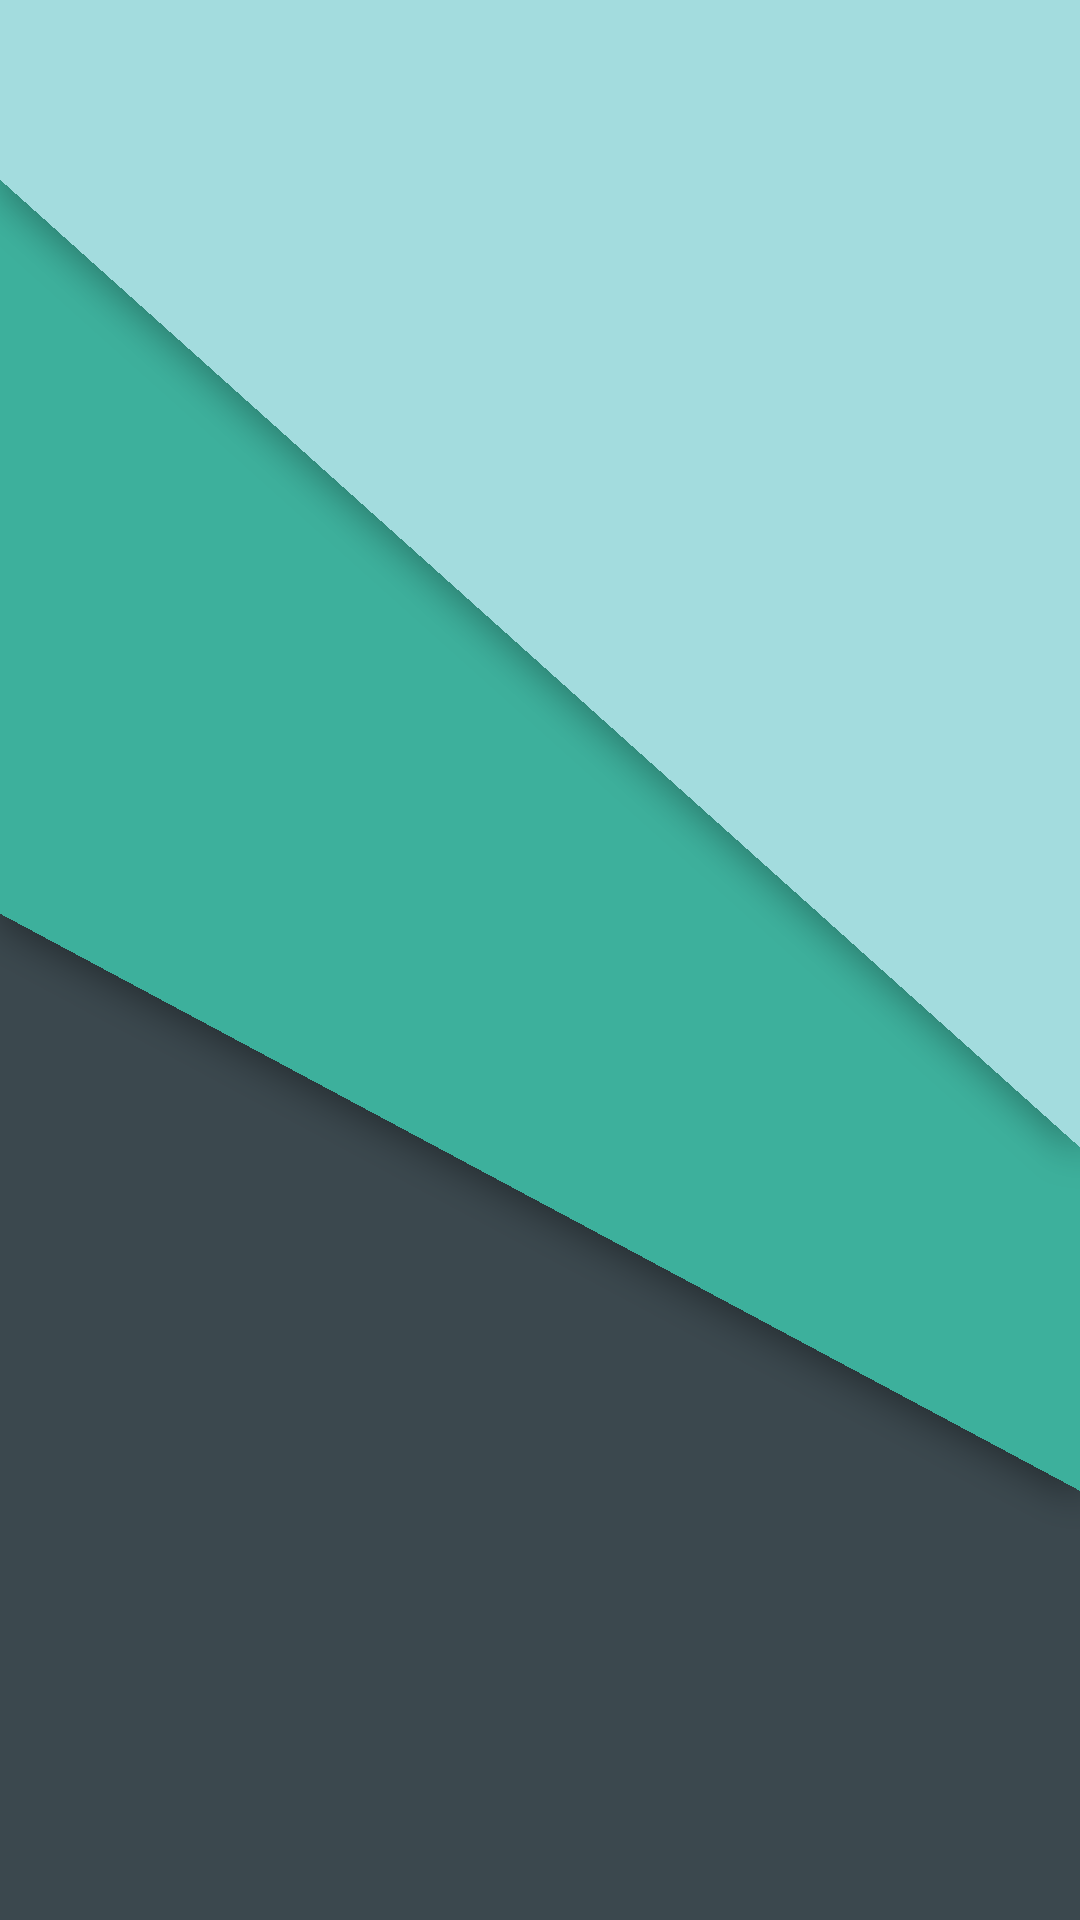 Material Design Inspired Wallpaper. Android wallpaper, Geometric wallpaper iphone, Material design